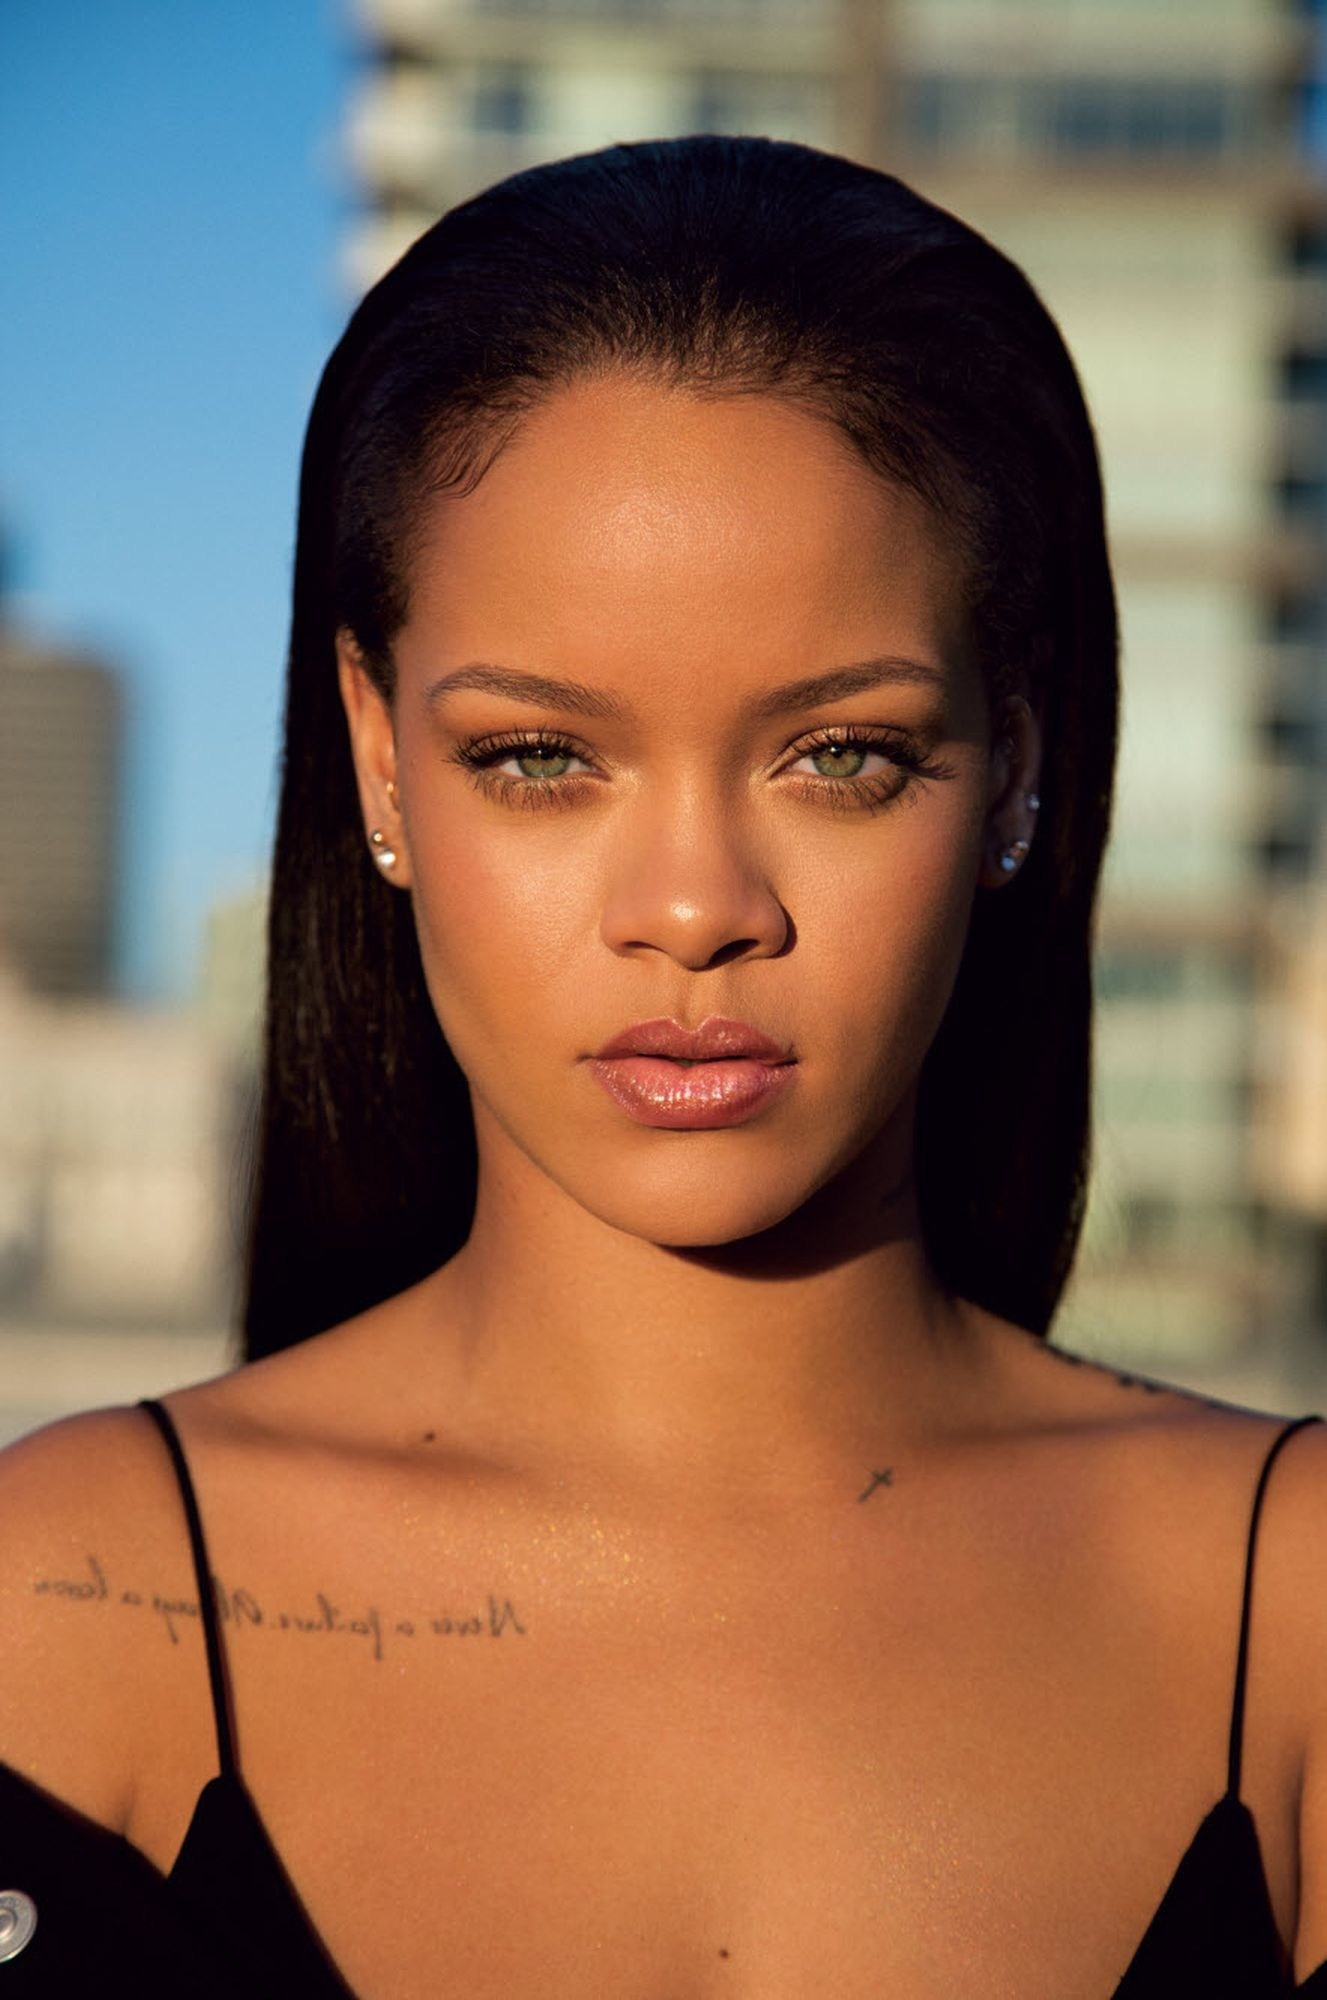 Rihanna Launches Fenty Beauty, a Global Makeup Brand, in 17 Countries